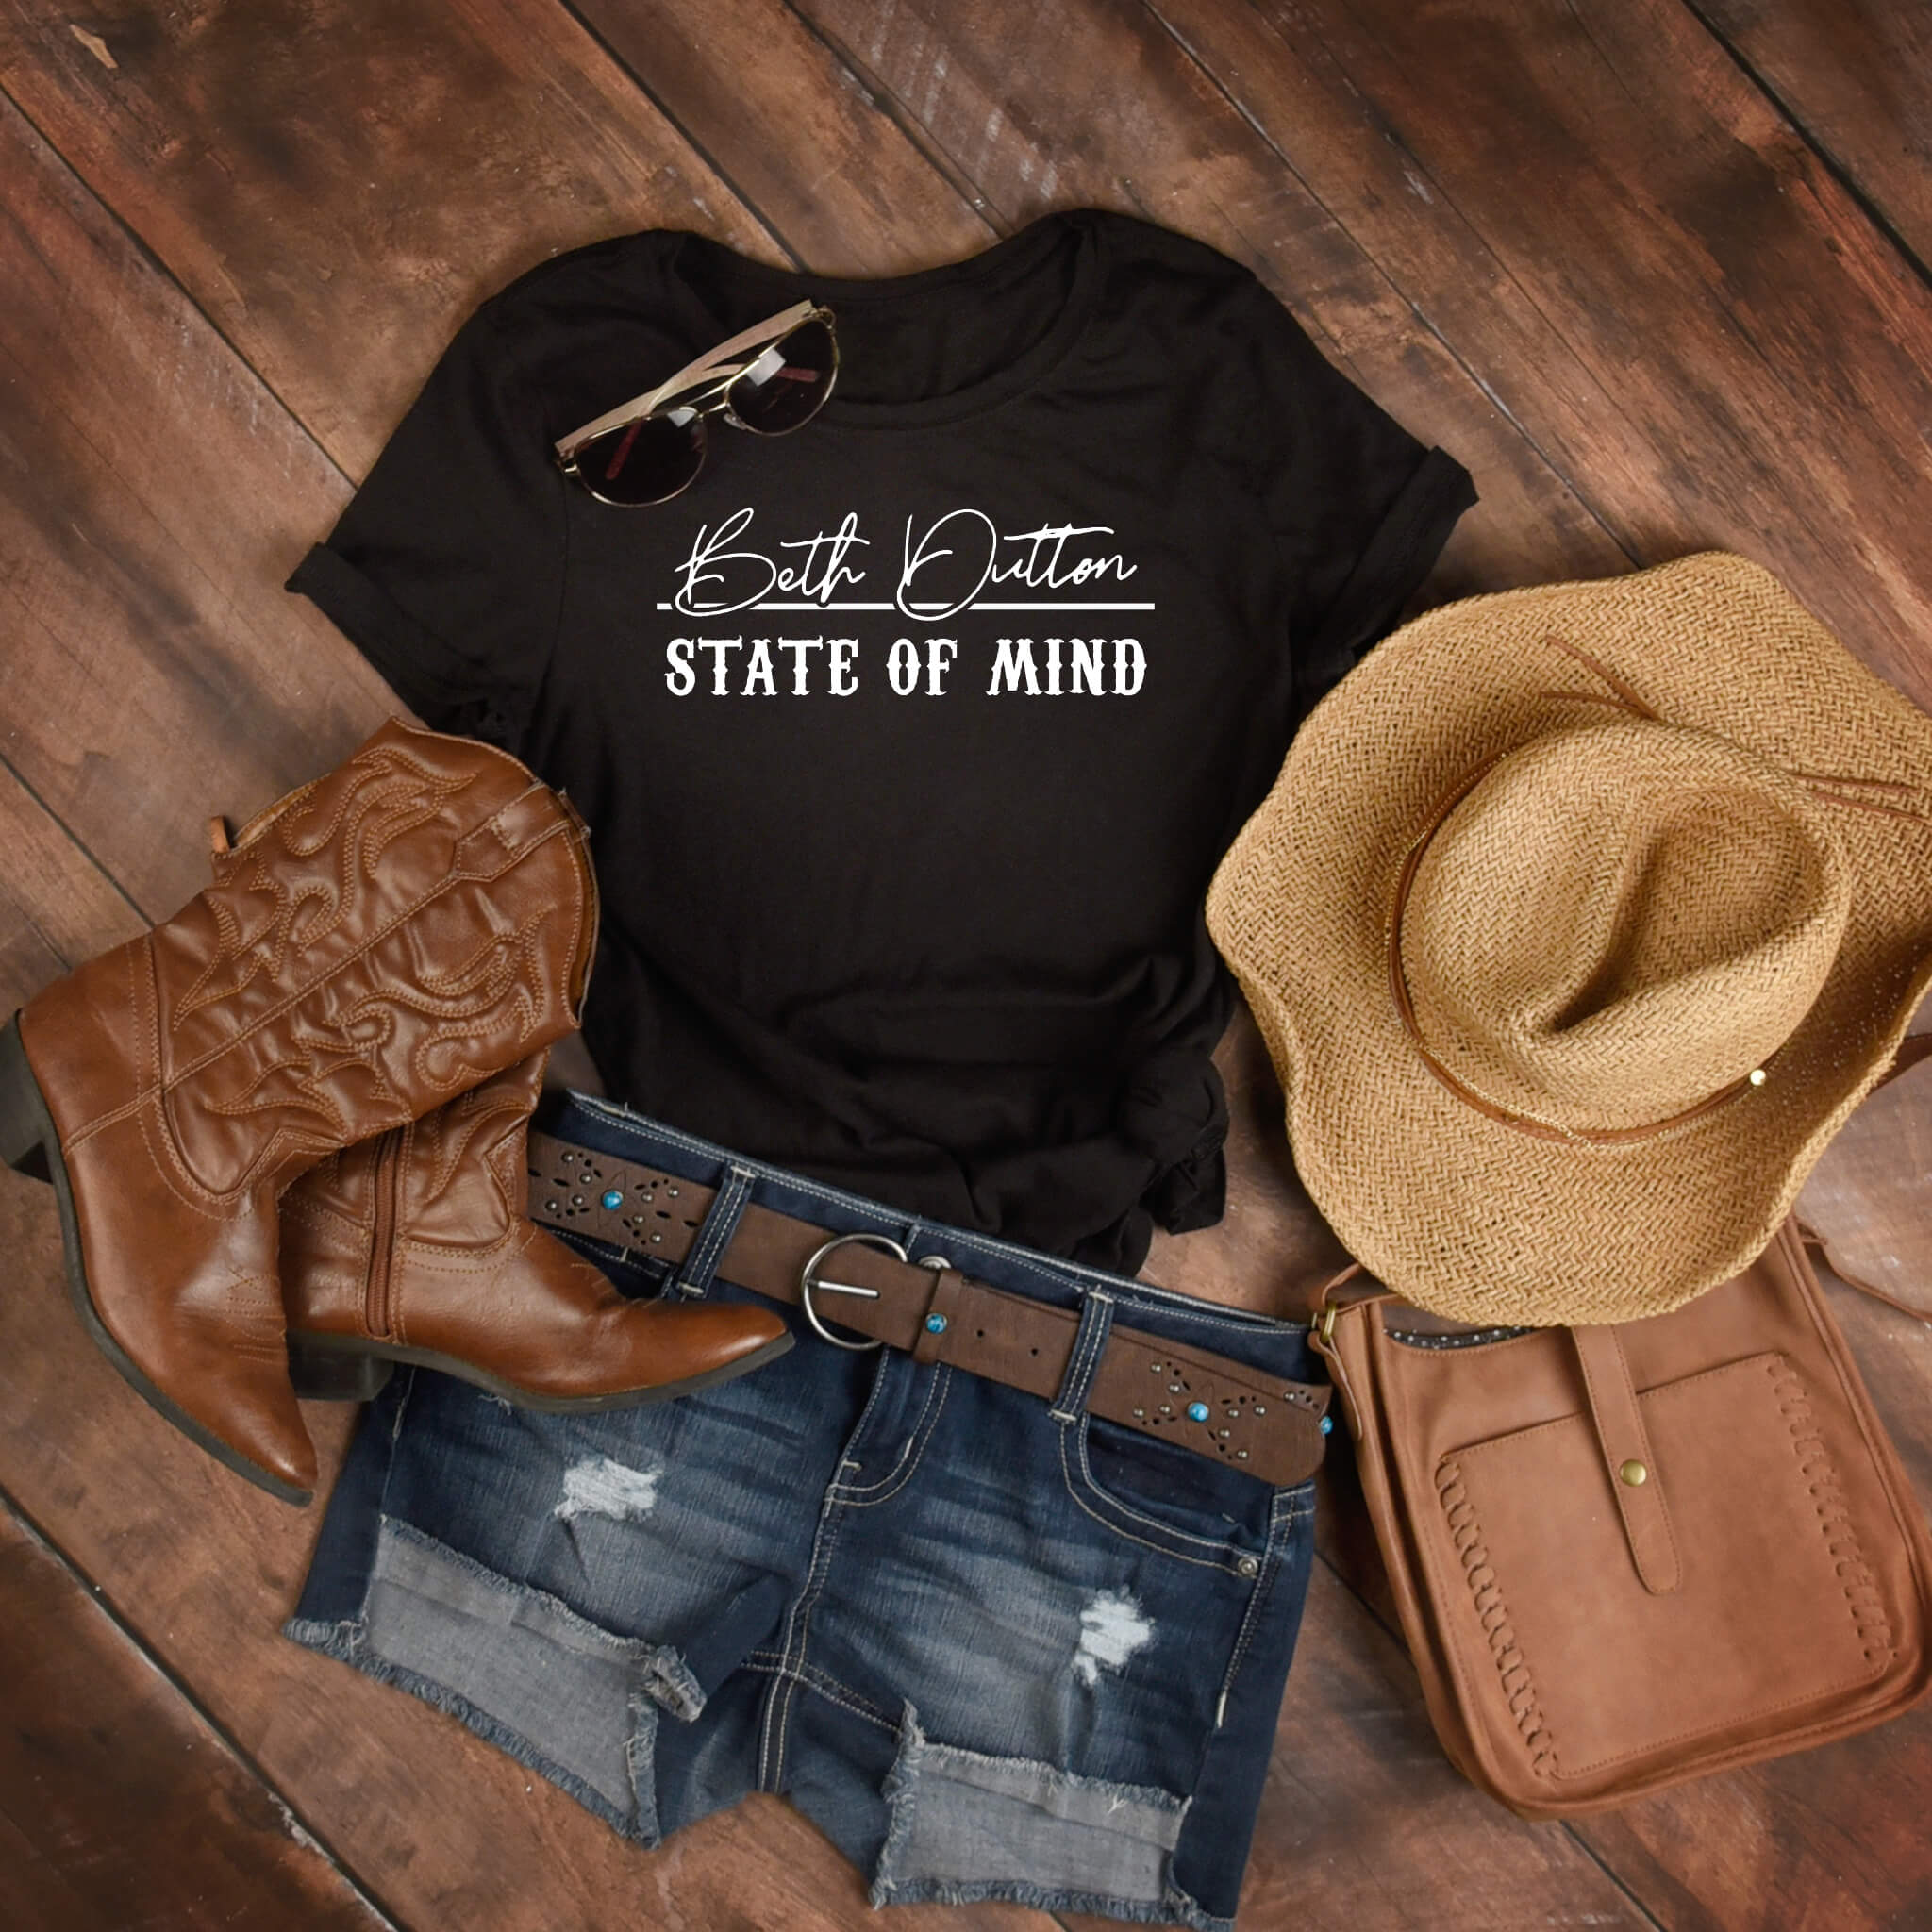 Yellowstone T-Shirt, Beth Dutton State Of Mind, Women’s Tank Top, Ladies T-Shirt, Beth Dutton Quotes, Country Western Tank, Girl’s Rodeo Tank, Custom Apparel, Best Of Beth Dutton T-Shirt